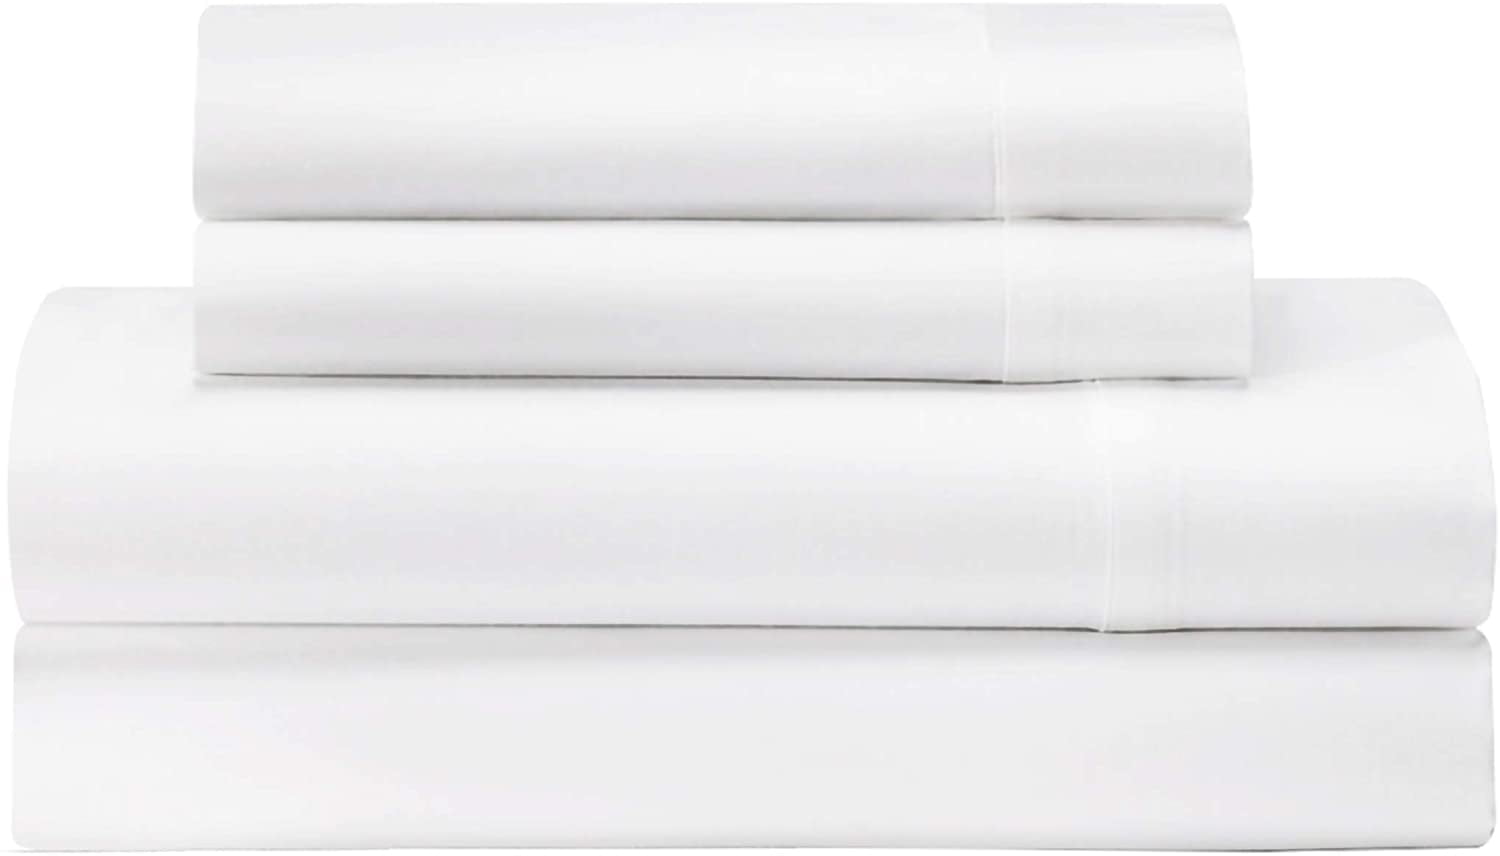 100% Cotton Percale Bed Sheet Set 350 Thread Count Full Bright White Kwise 4 Pieces